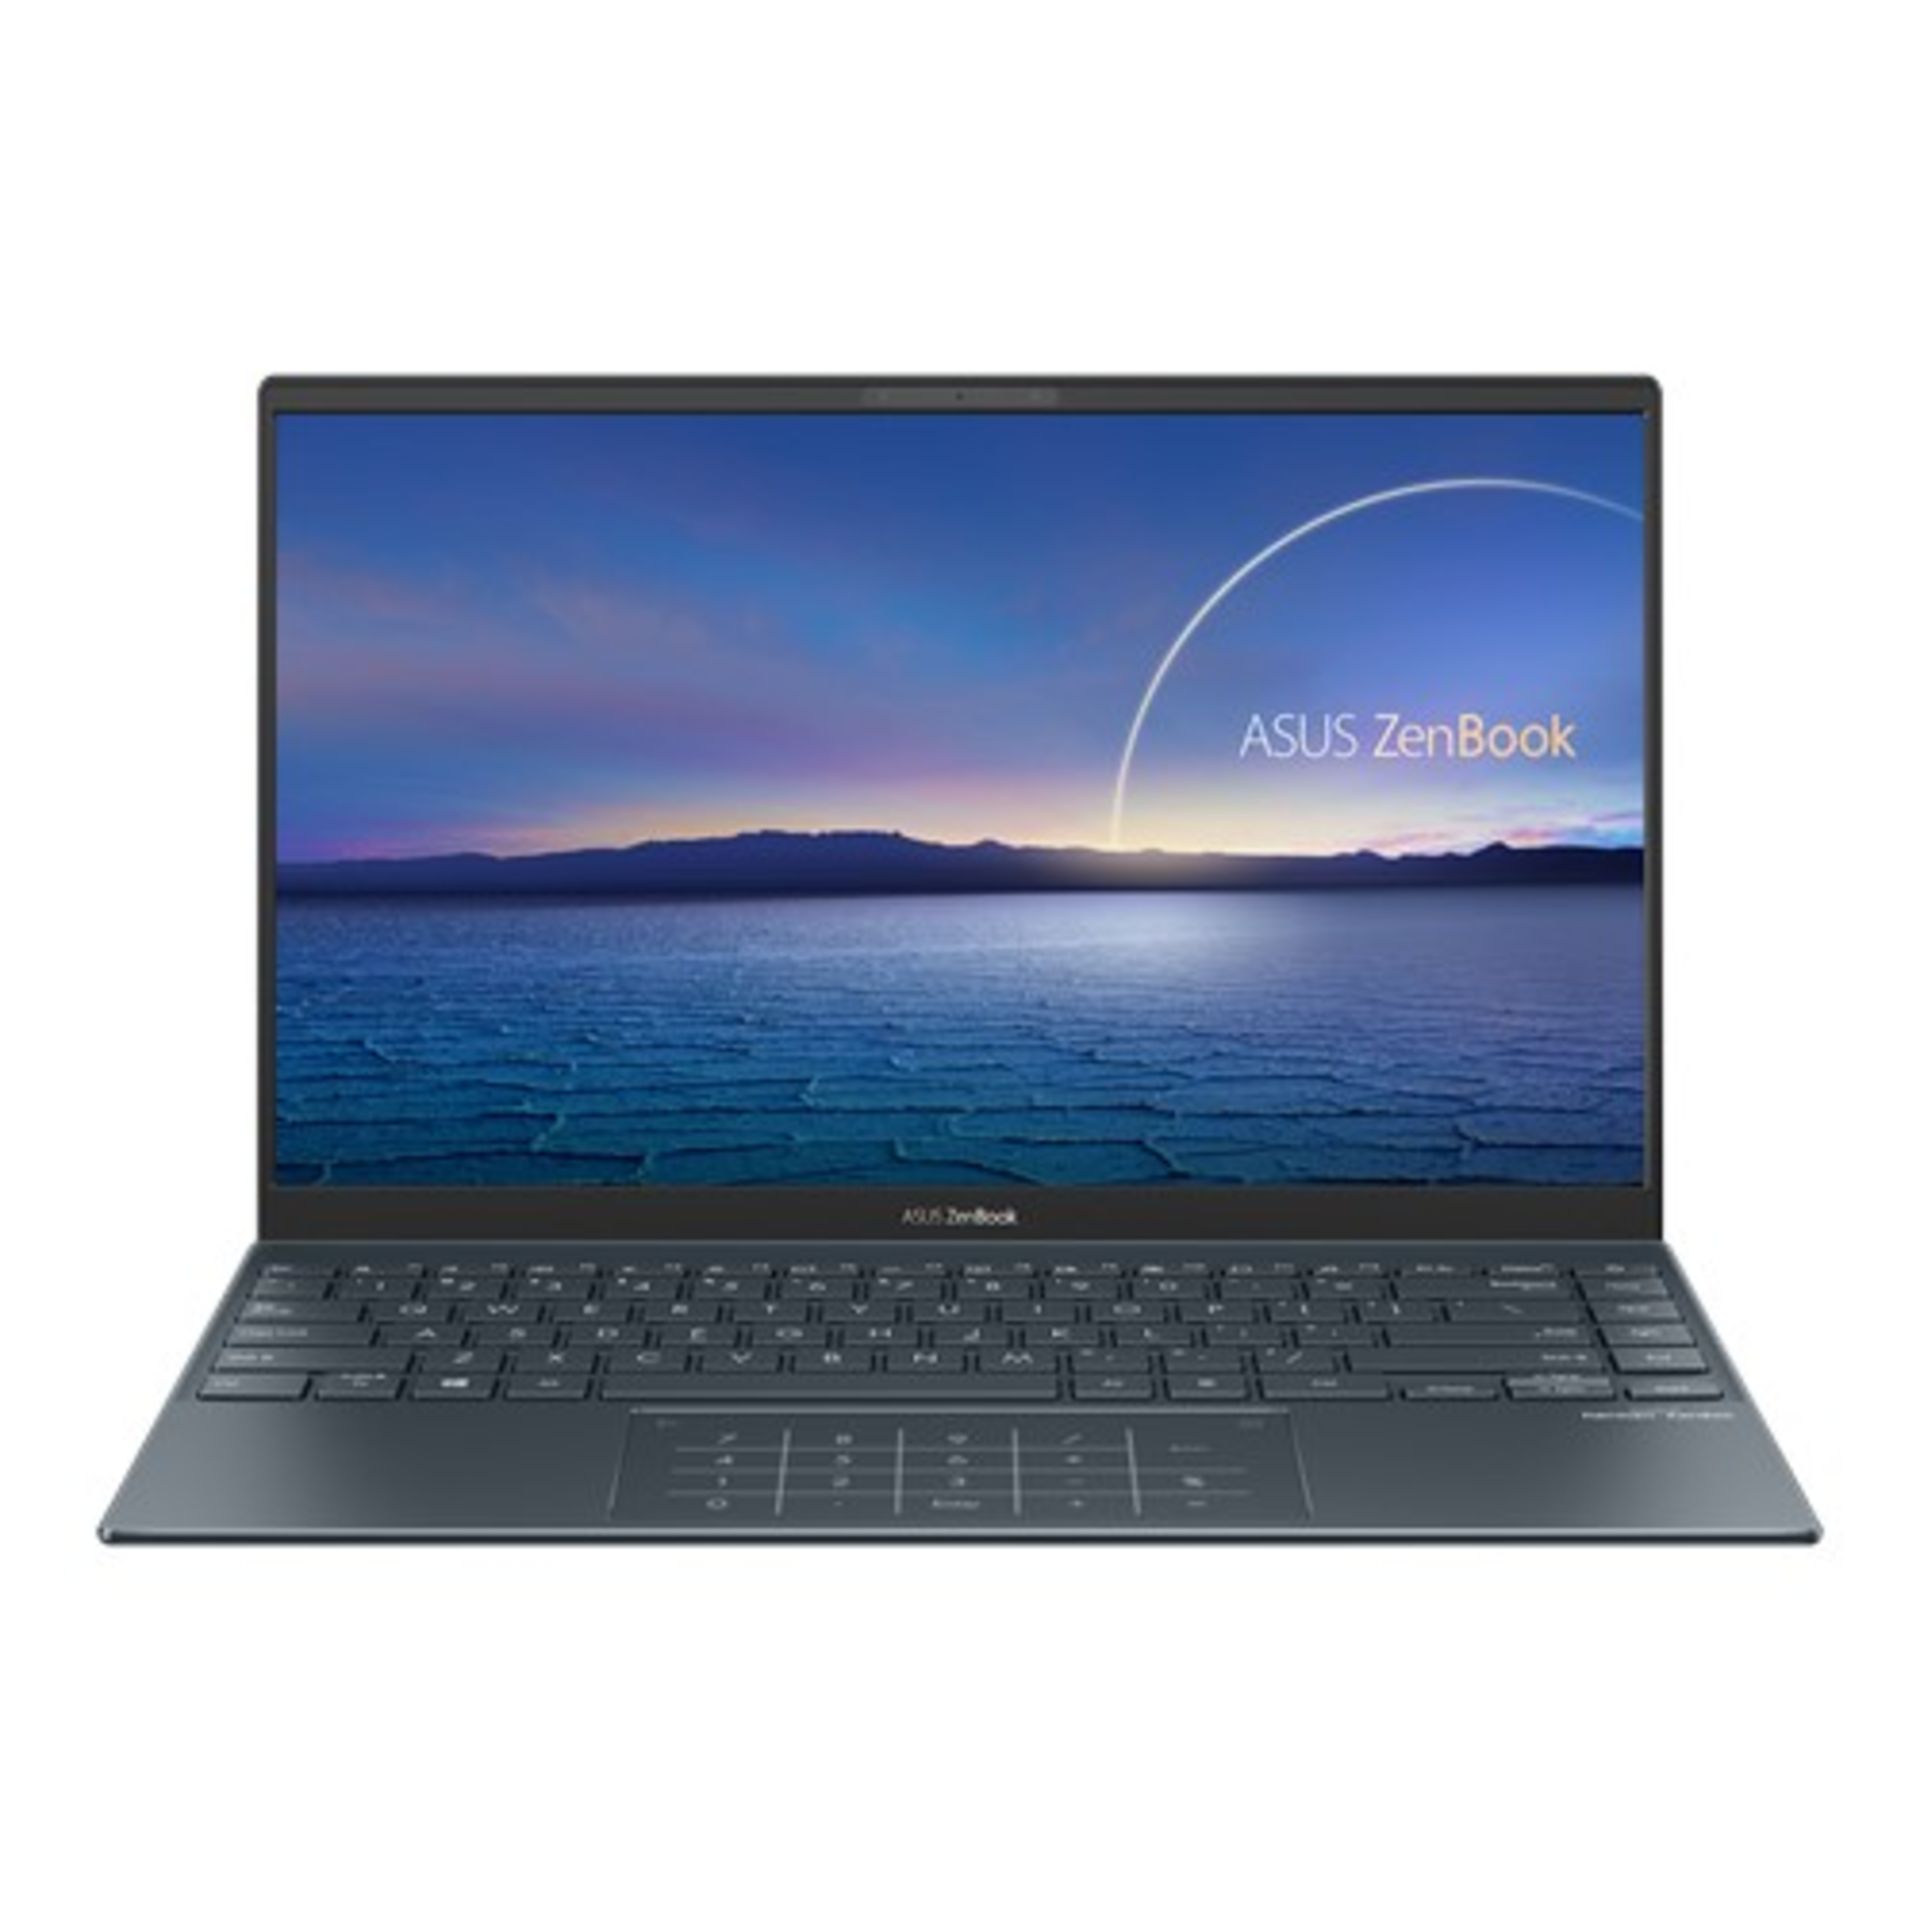 1 BOXED ASUS ZENBOOK UX425JA 14" LAPTOP I5-1035G1, 8GB RAM, 512 GB SSD WITH CHARGER RRP Â£899 (